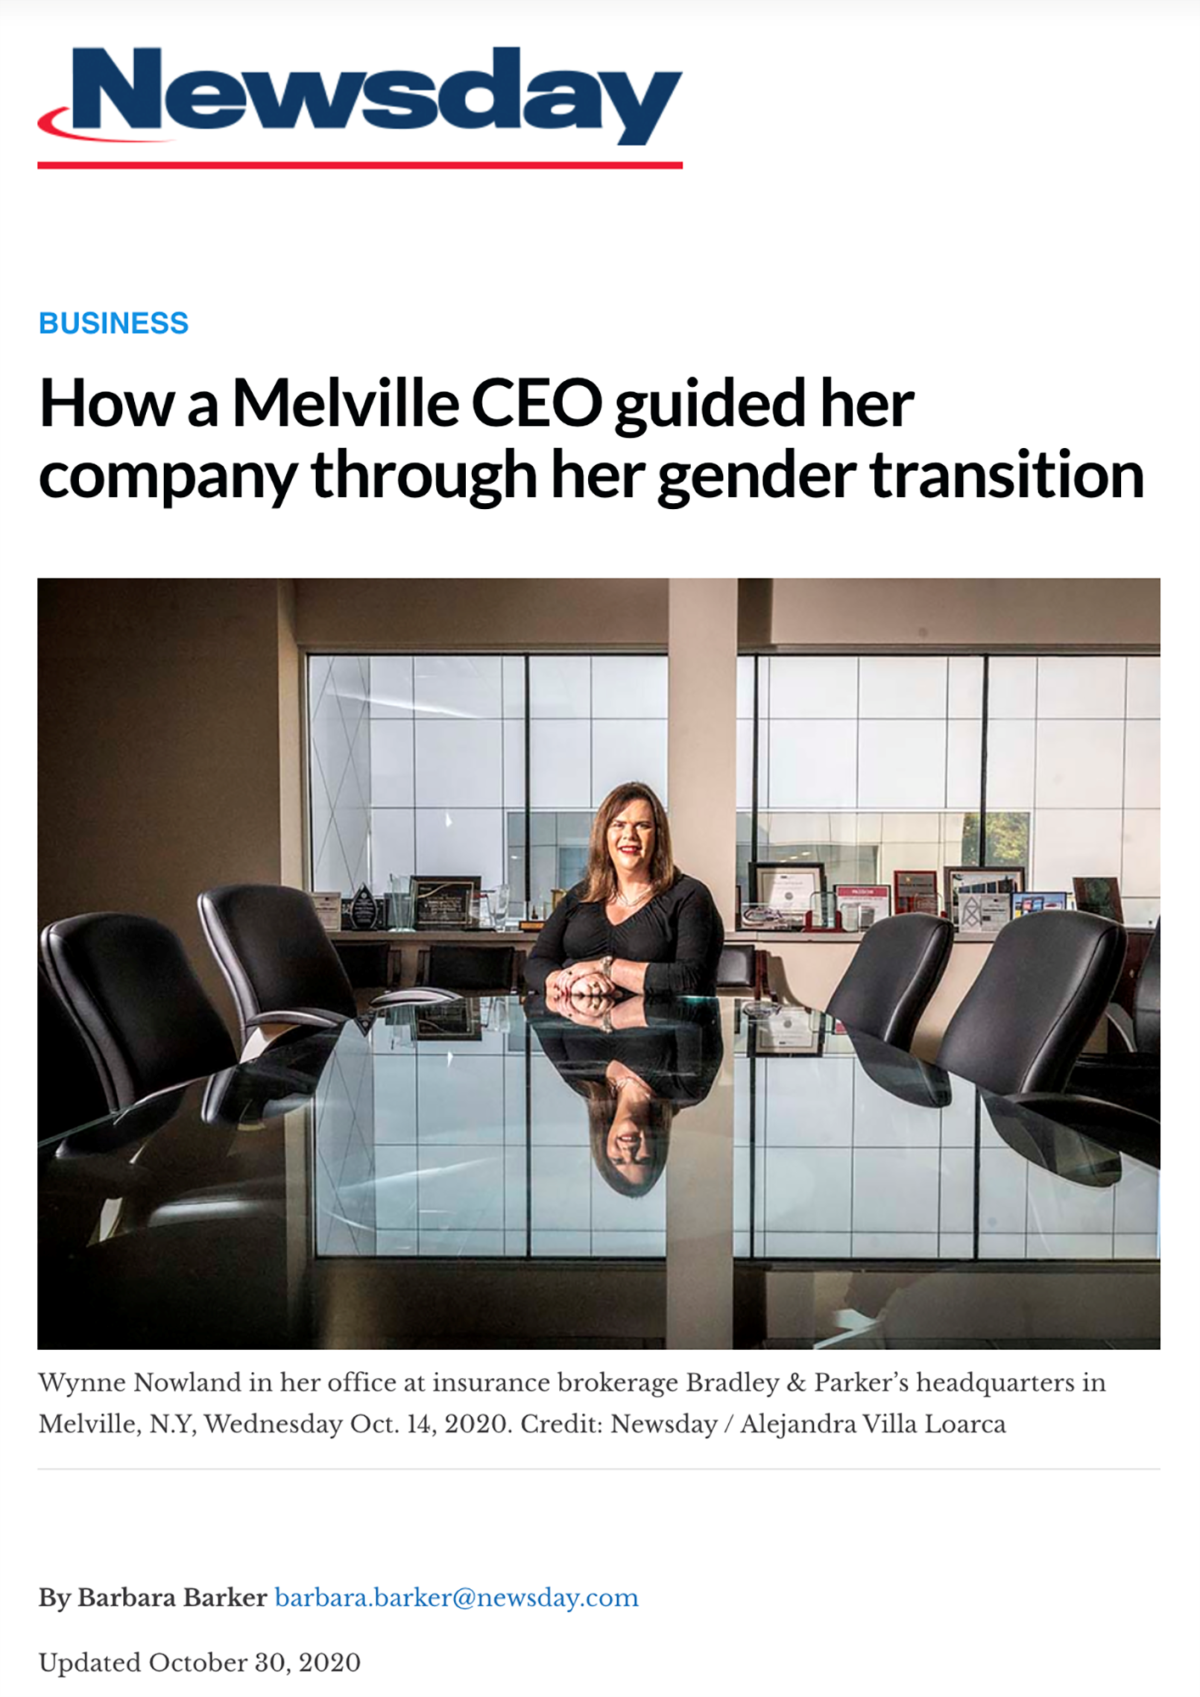 Newsday Publishes Feature Article on CEO Wynne Nowland